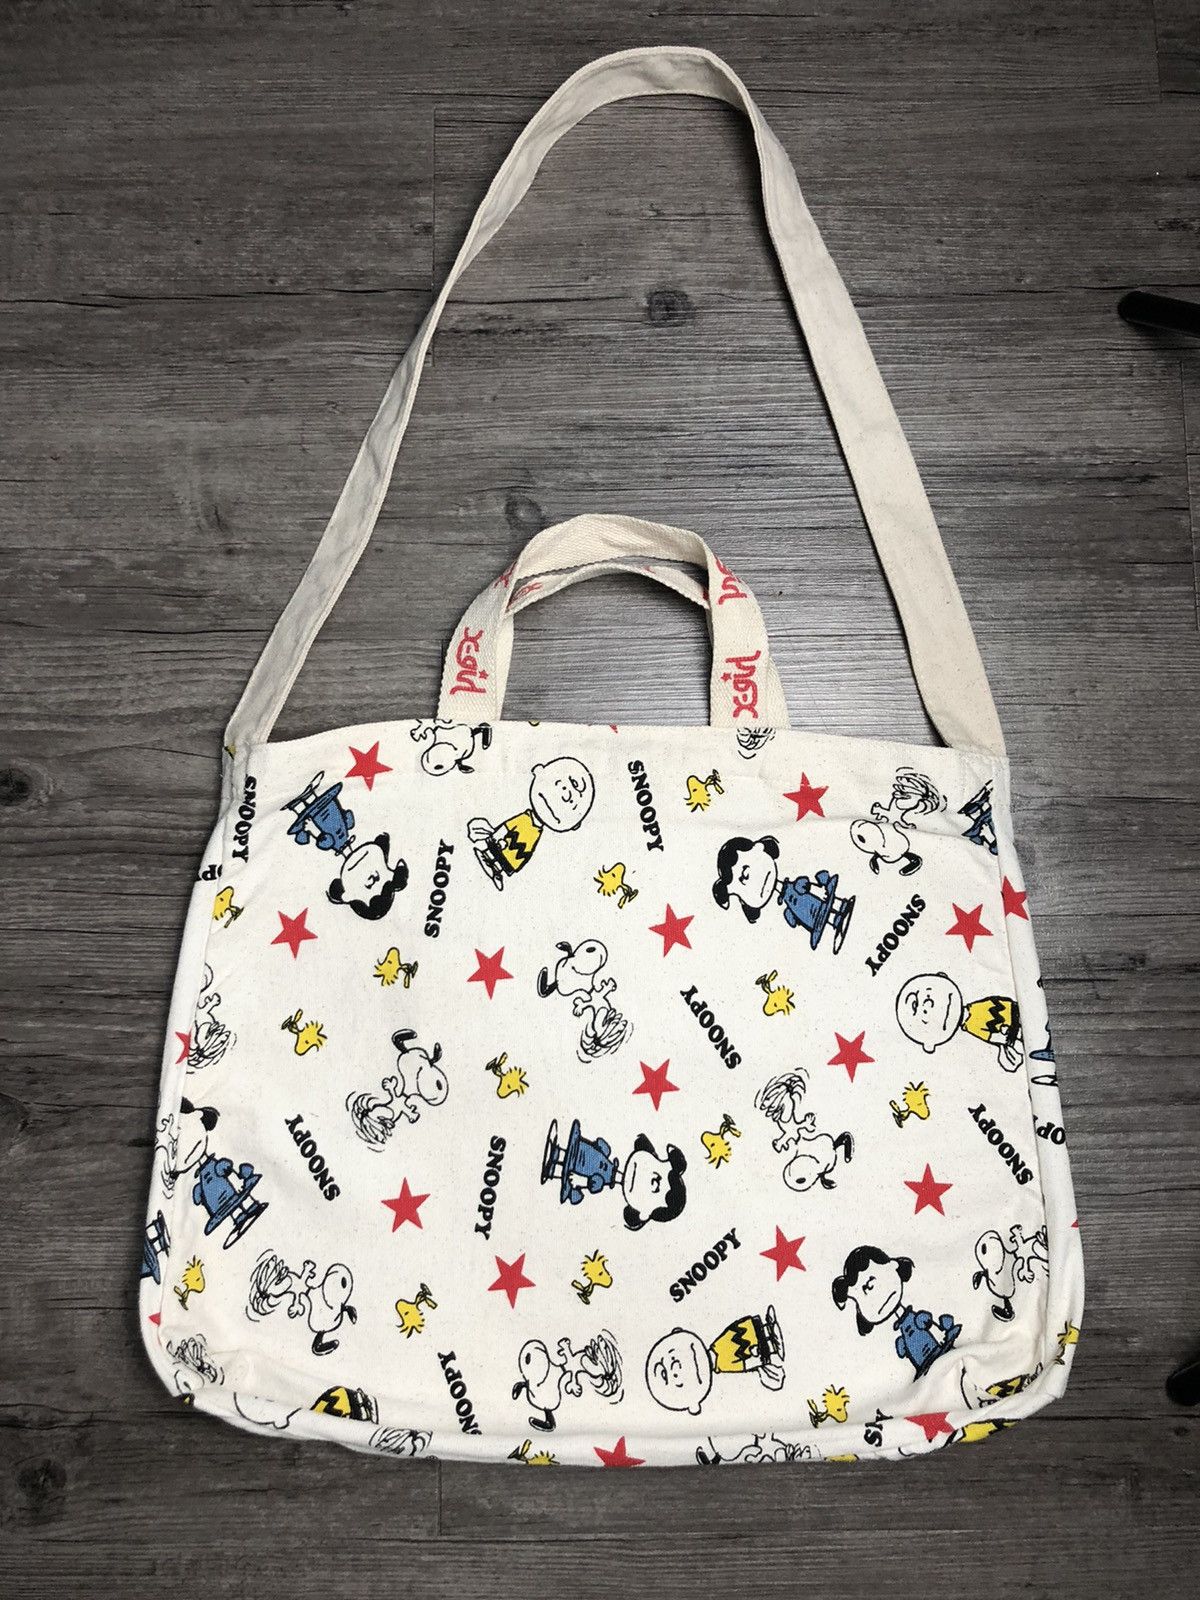 Vintage Peanuts x xgirl snoopy tote bag Size ONE SIZE - 6 Thumbnail